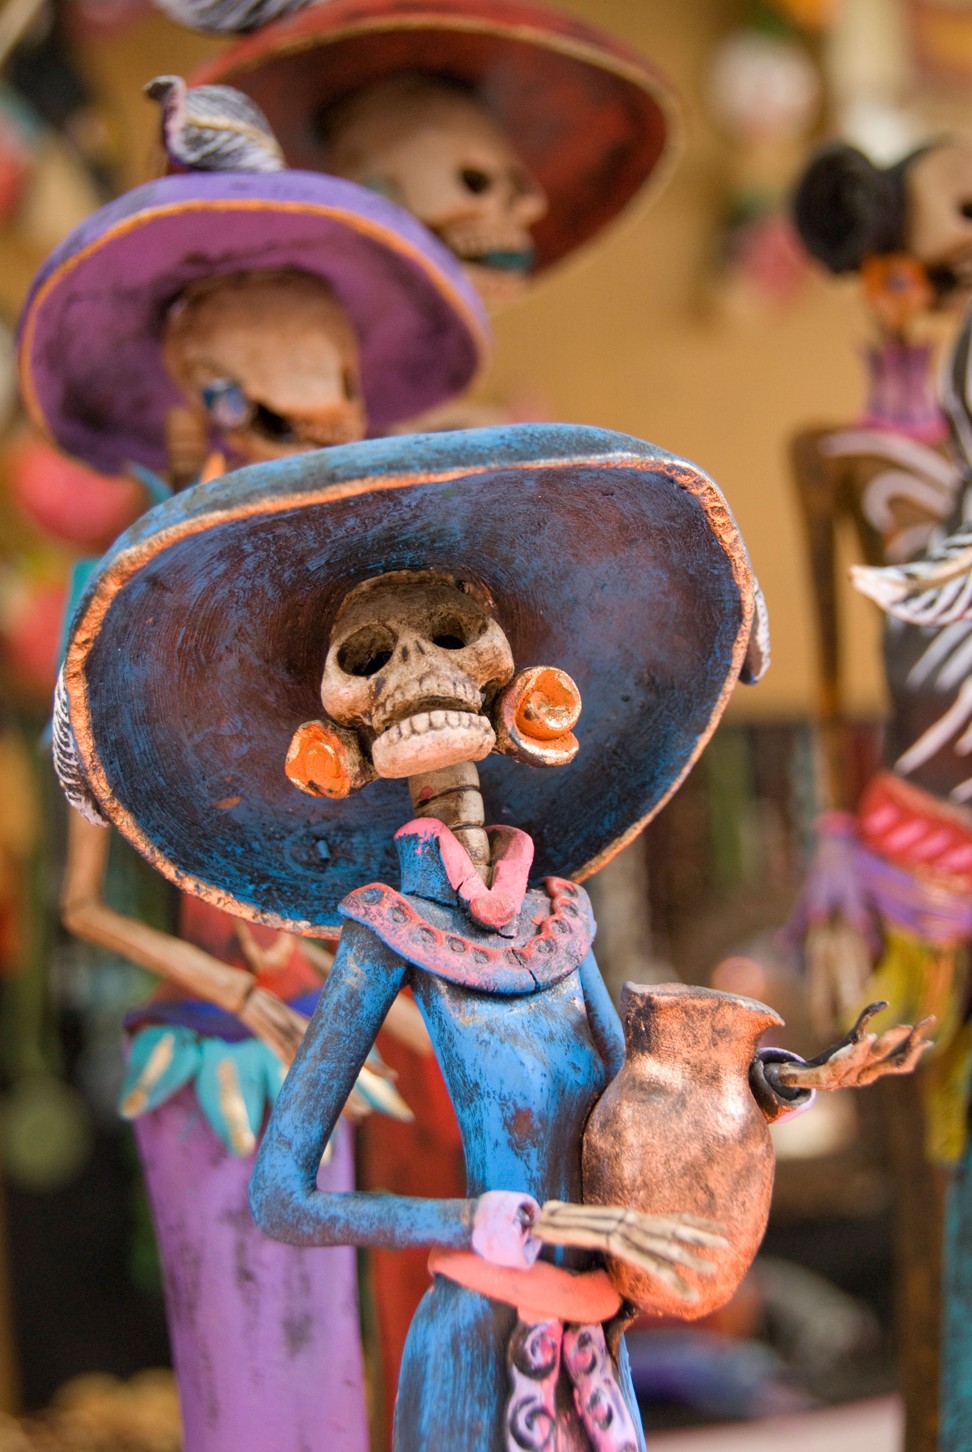 A Day of the Dead figurine. Photo: Alamy